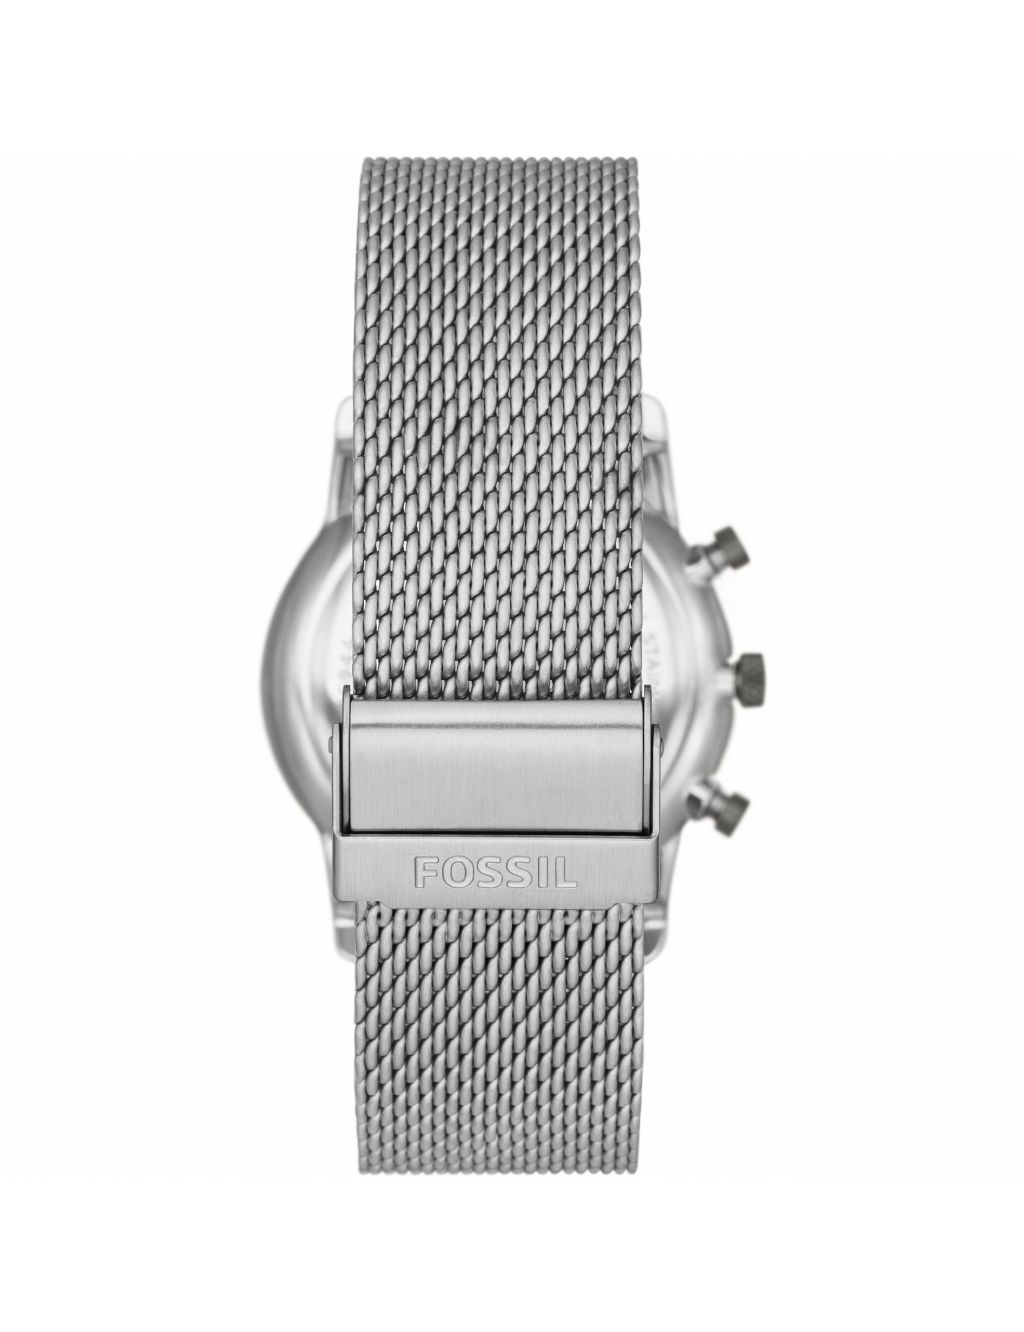 Fossil Minimalist Stainless Steel Watch image 2